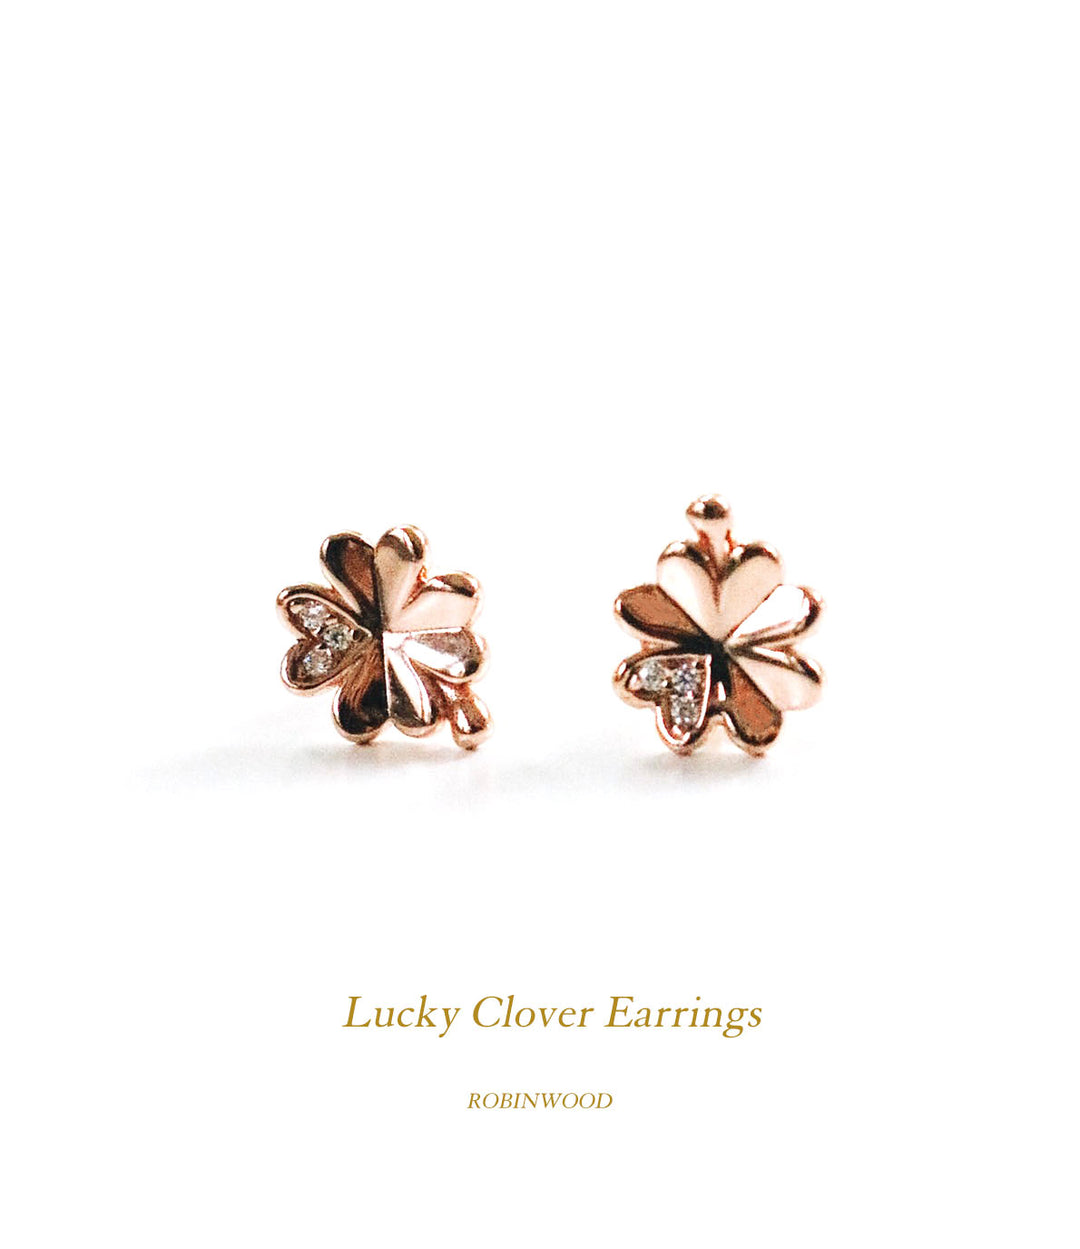 " Limited Series " Lucky Clover Earrings, Robinwood, Limited 88 Pieces